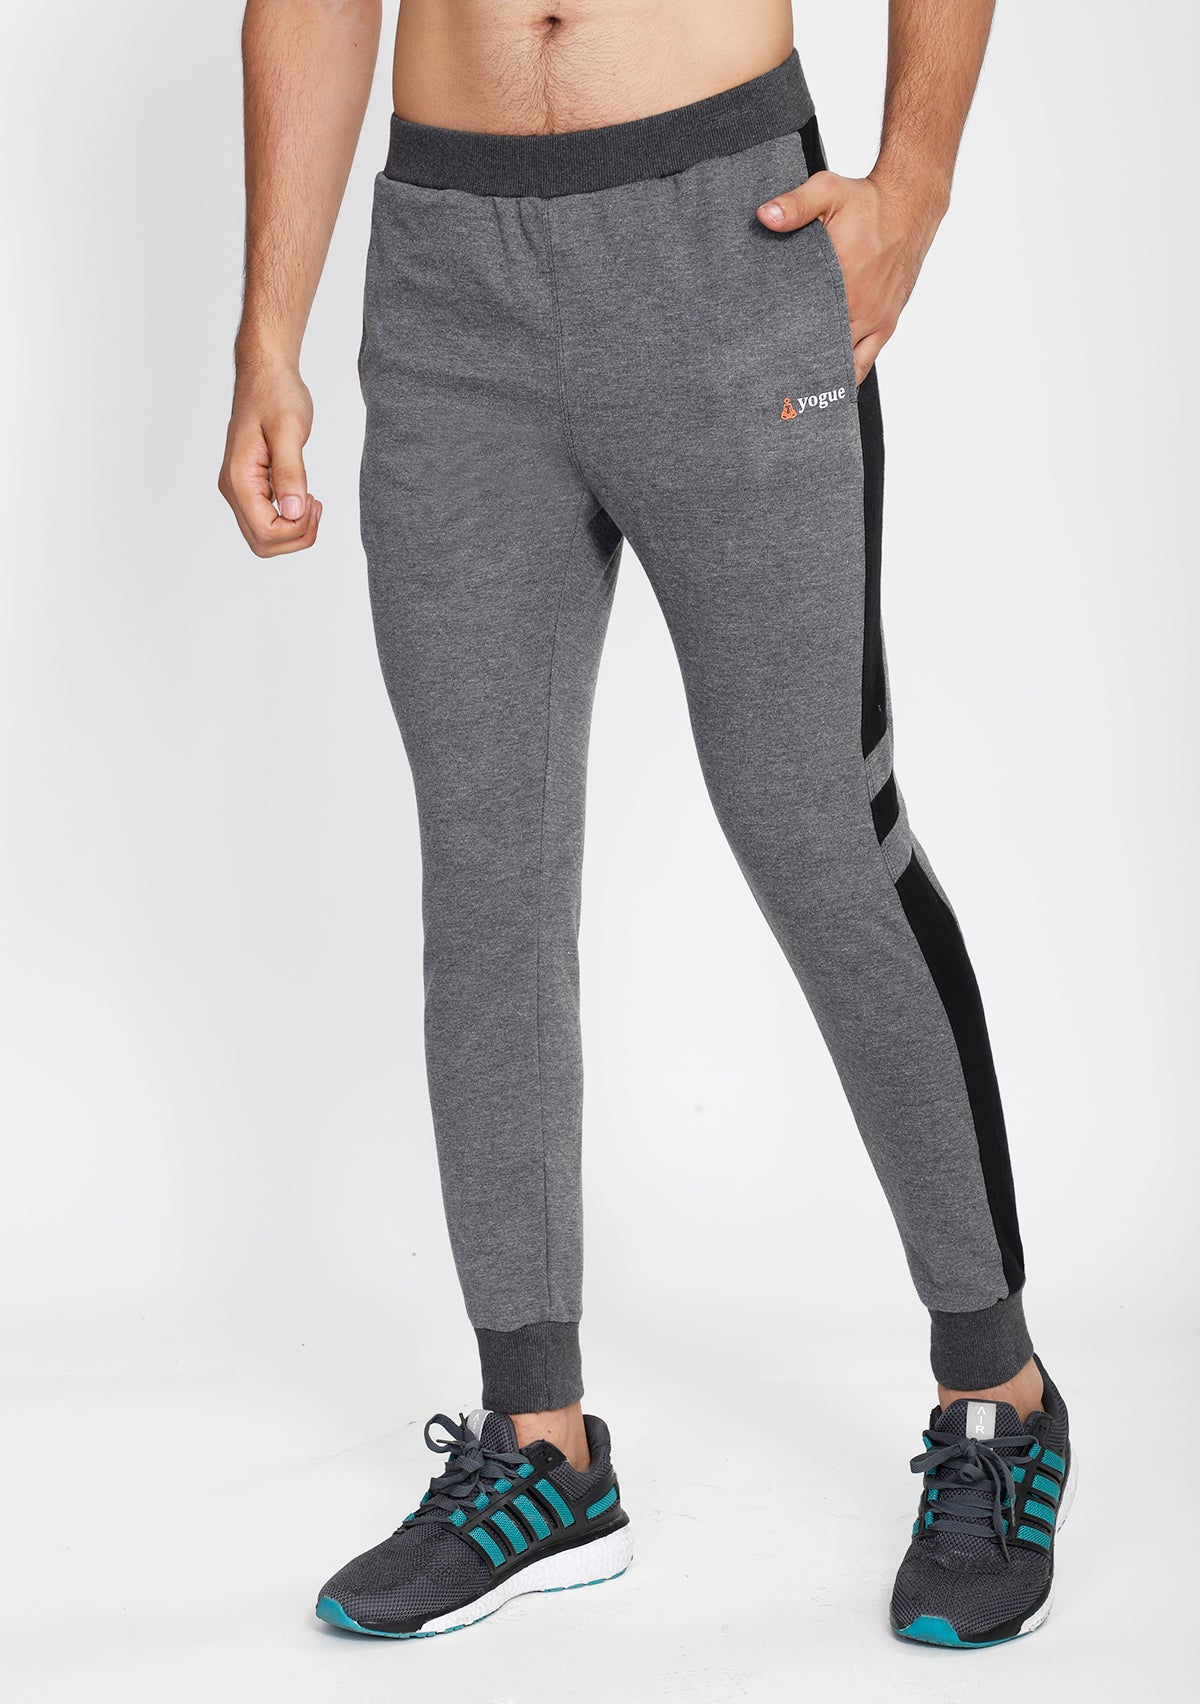 Graphite Grey Hooded Tracksuit with Black Contrast - Yogue Activewear